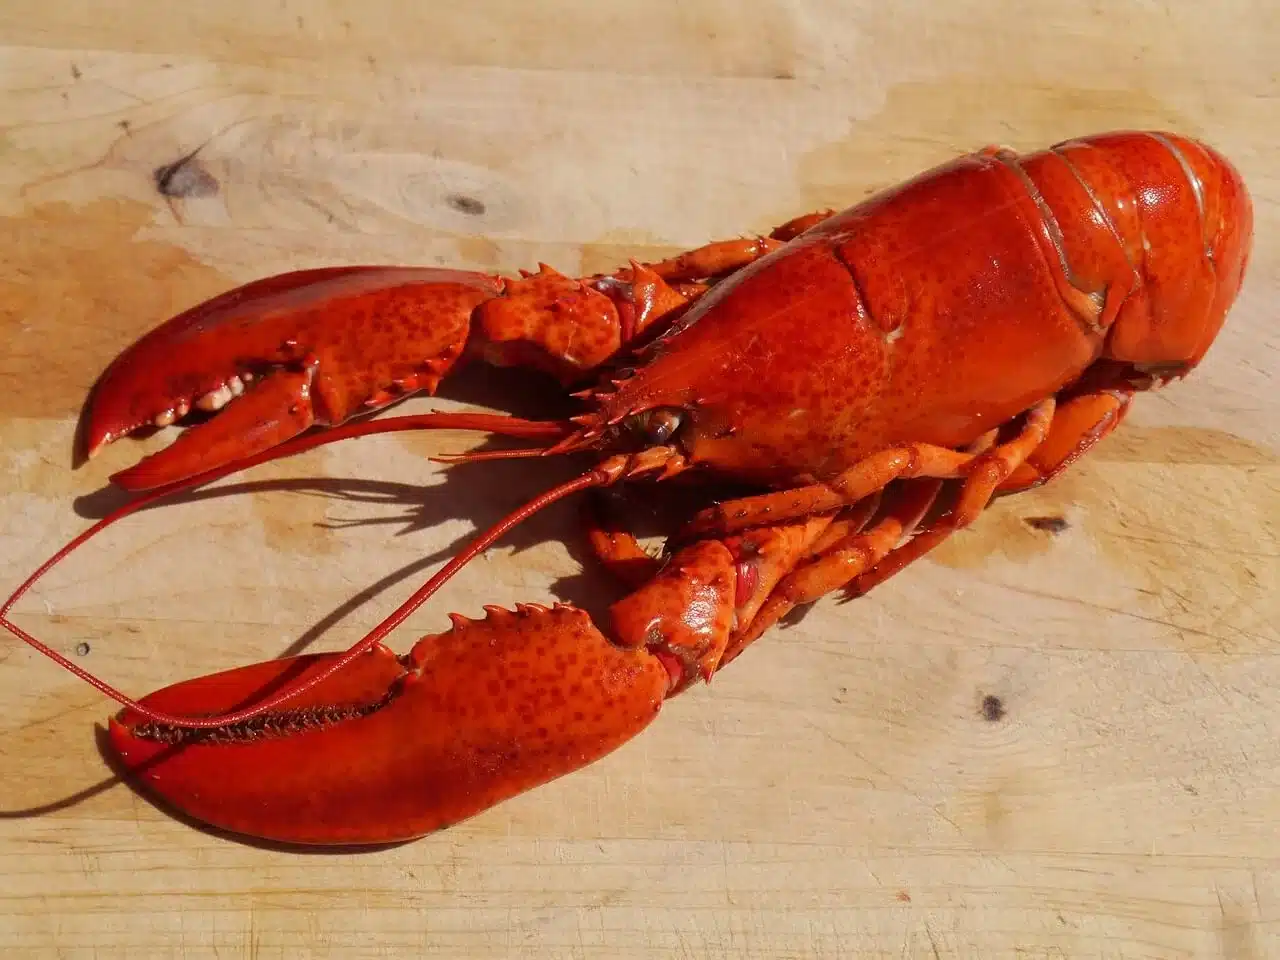 Discover essential Cooking Lobster Tips to ensure juicy, tender results every time. Master lobster preparation with our guide.